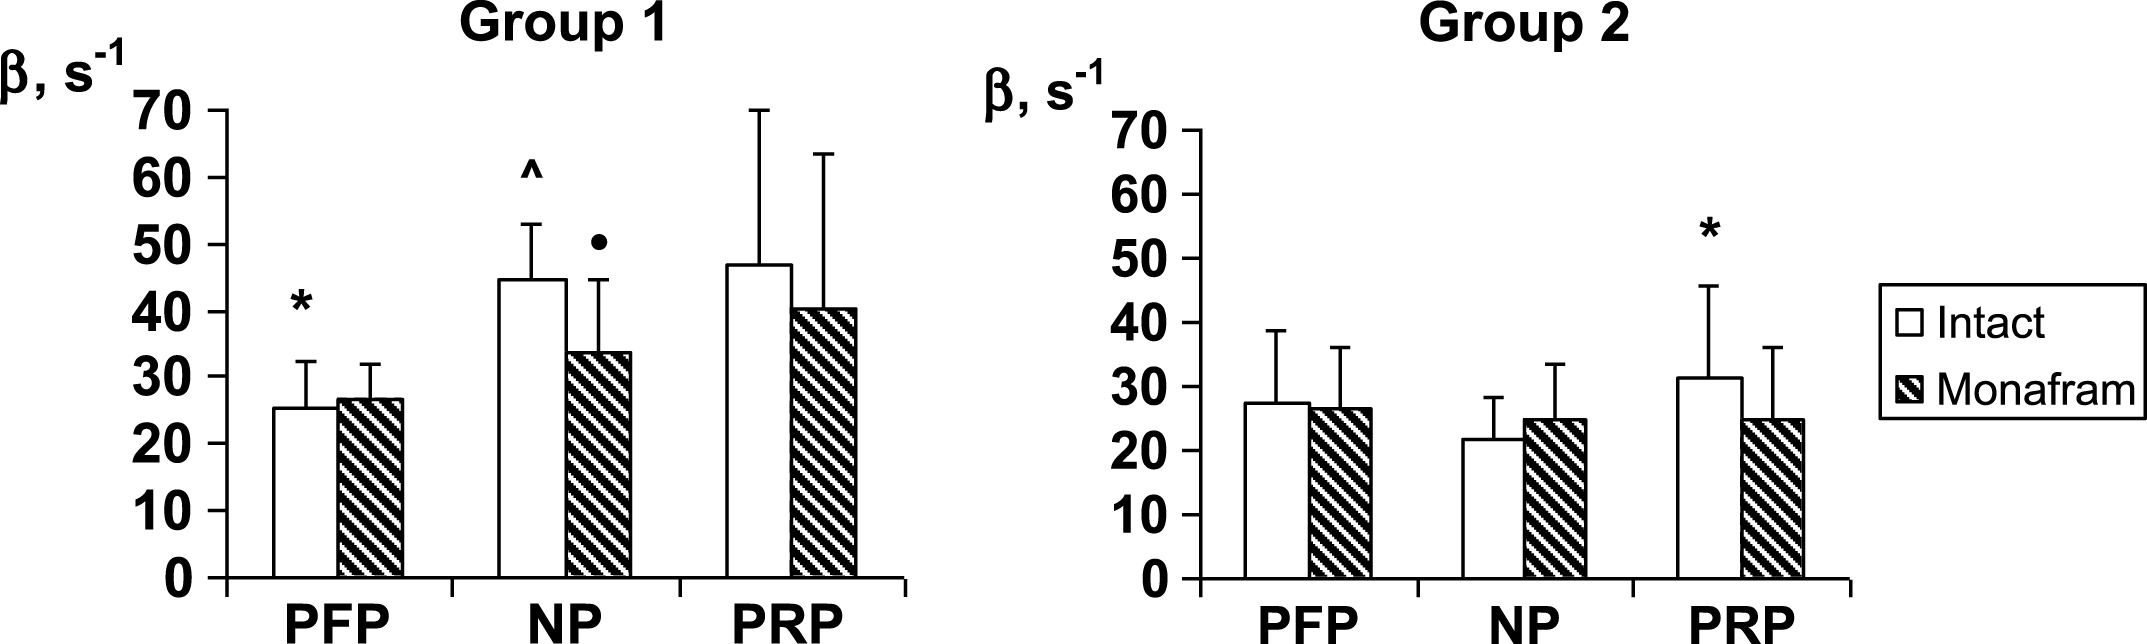 Influence of monafram on hydrodynamic strength of RBC aggregates (β) in platelet-free plasma (PFP), native plasma (NP), and platelet rich plasma (PRP) of healthy volunteers with “hyperaggregation” (Group 1, n = 6) and normal aggregation (Group 2, n = 12). A comparison of monafram-treated and intact samples, •p < 0.05. Difference from Group 2, ∧p < 0.001 and difference from “NP”, *p < 0.05.